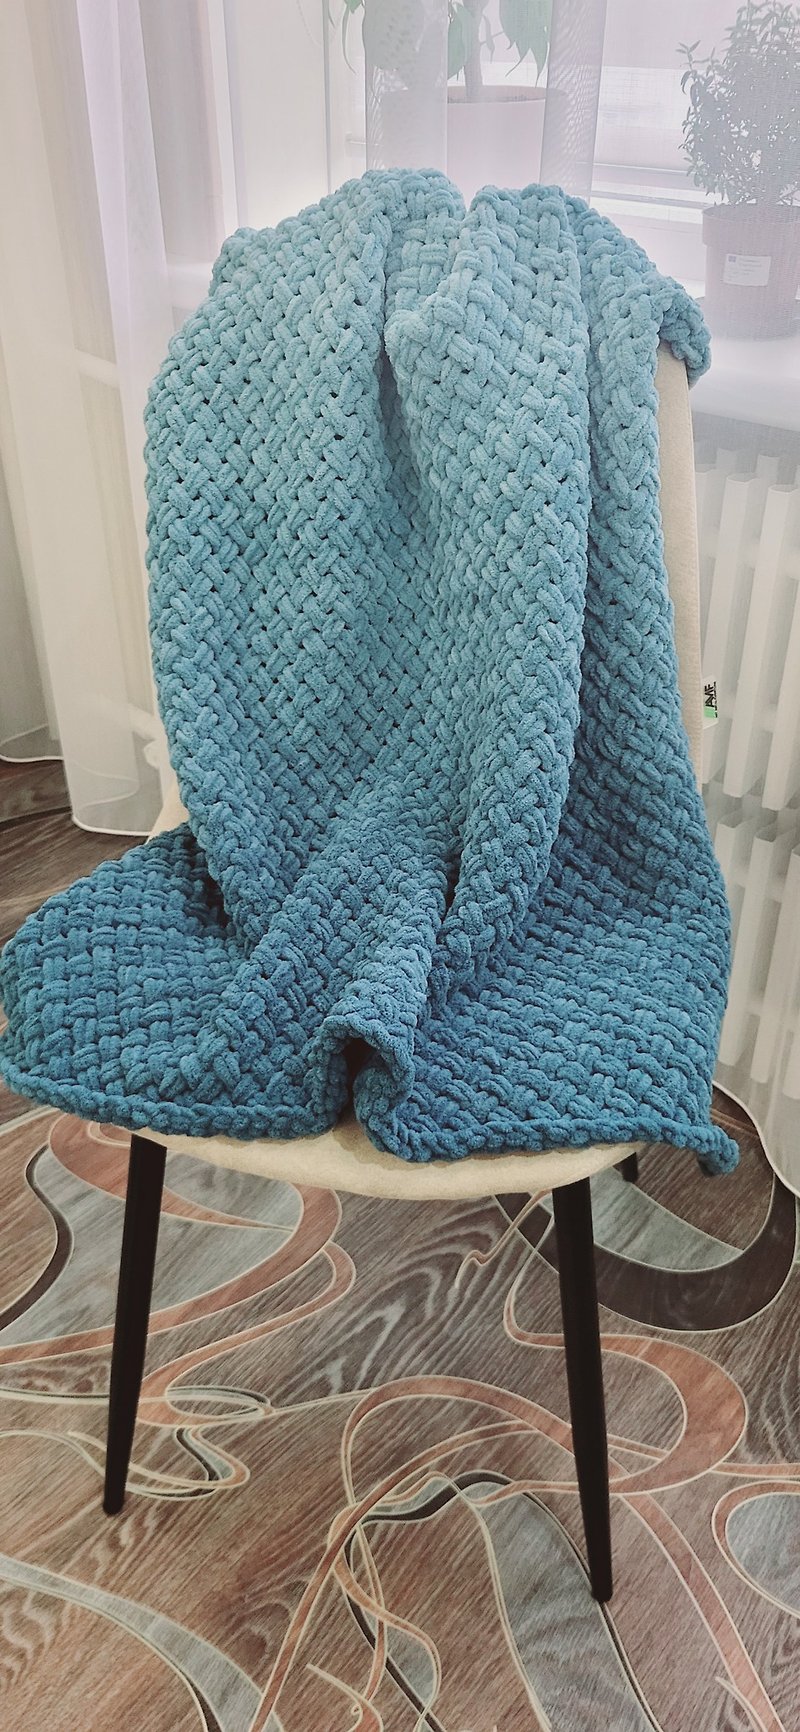 knitted handmade blanket (plaid) ombre mint color, size 85x85 - 被子/毛毯 - 聚酯纤维 